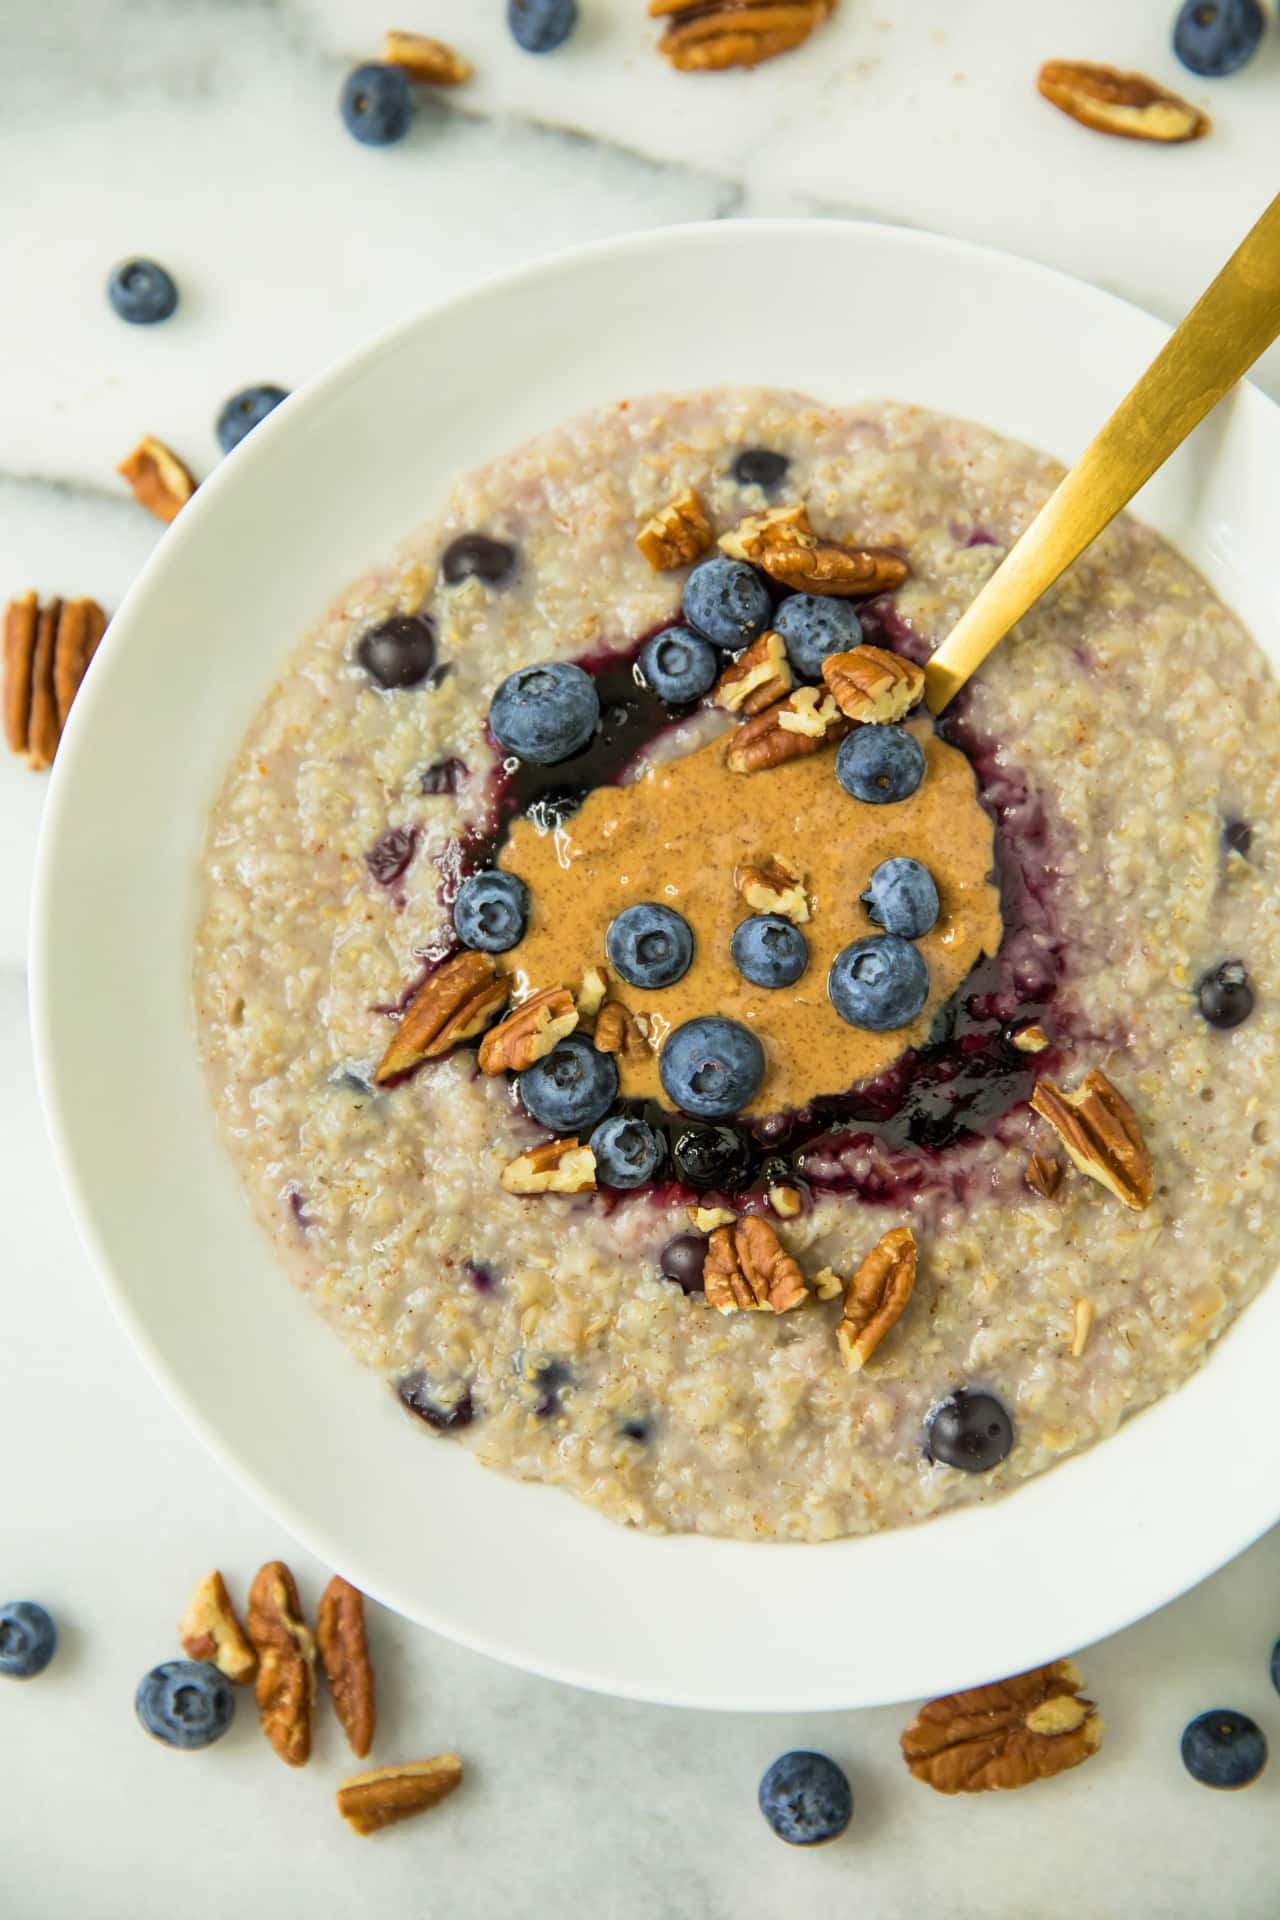 oatmeal in a white bowl topped with blueberries, almond butter, pecans and blueberry jam